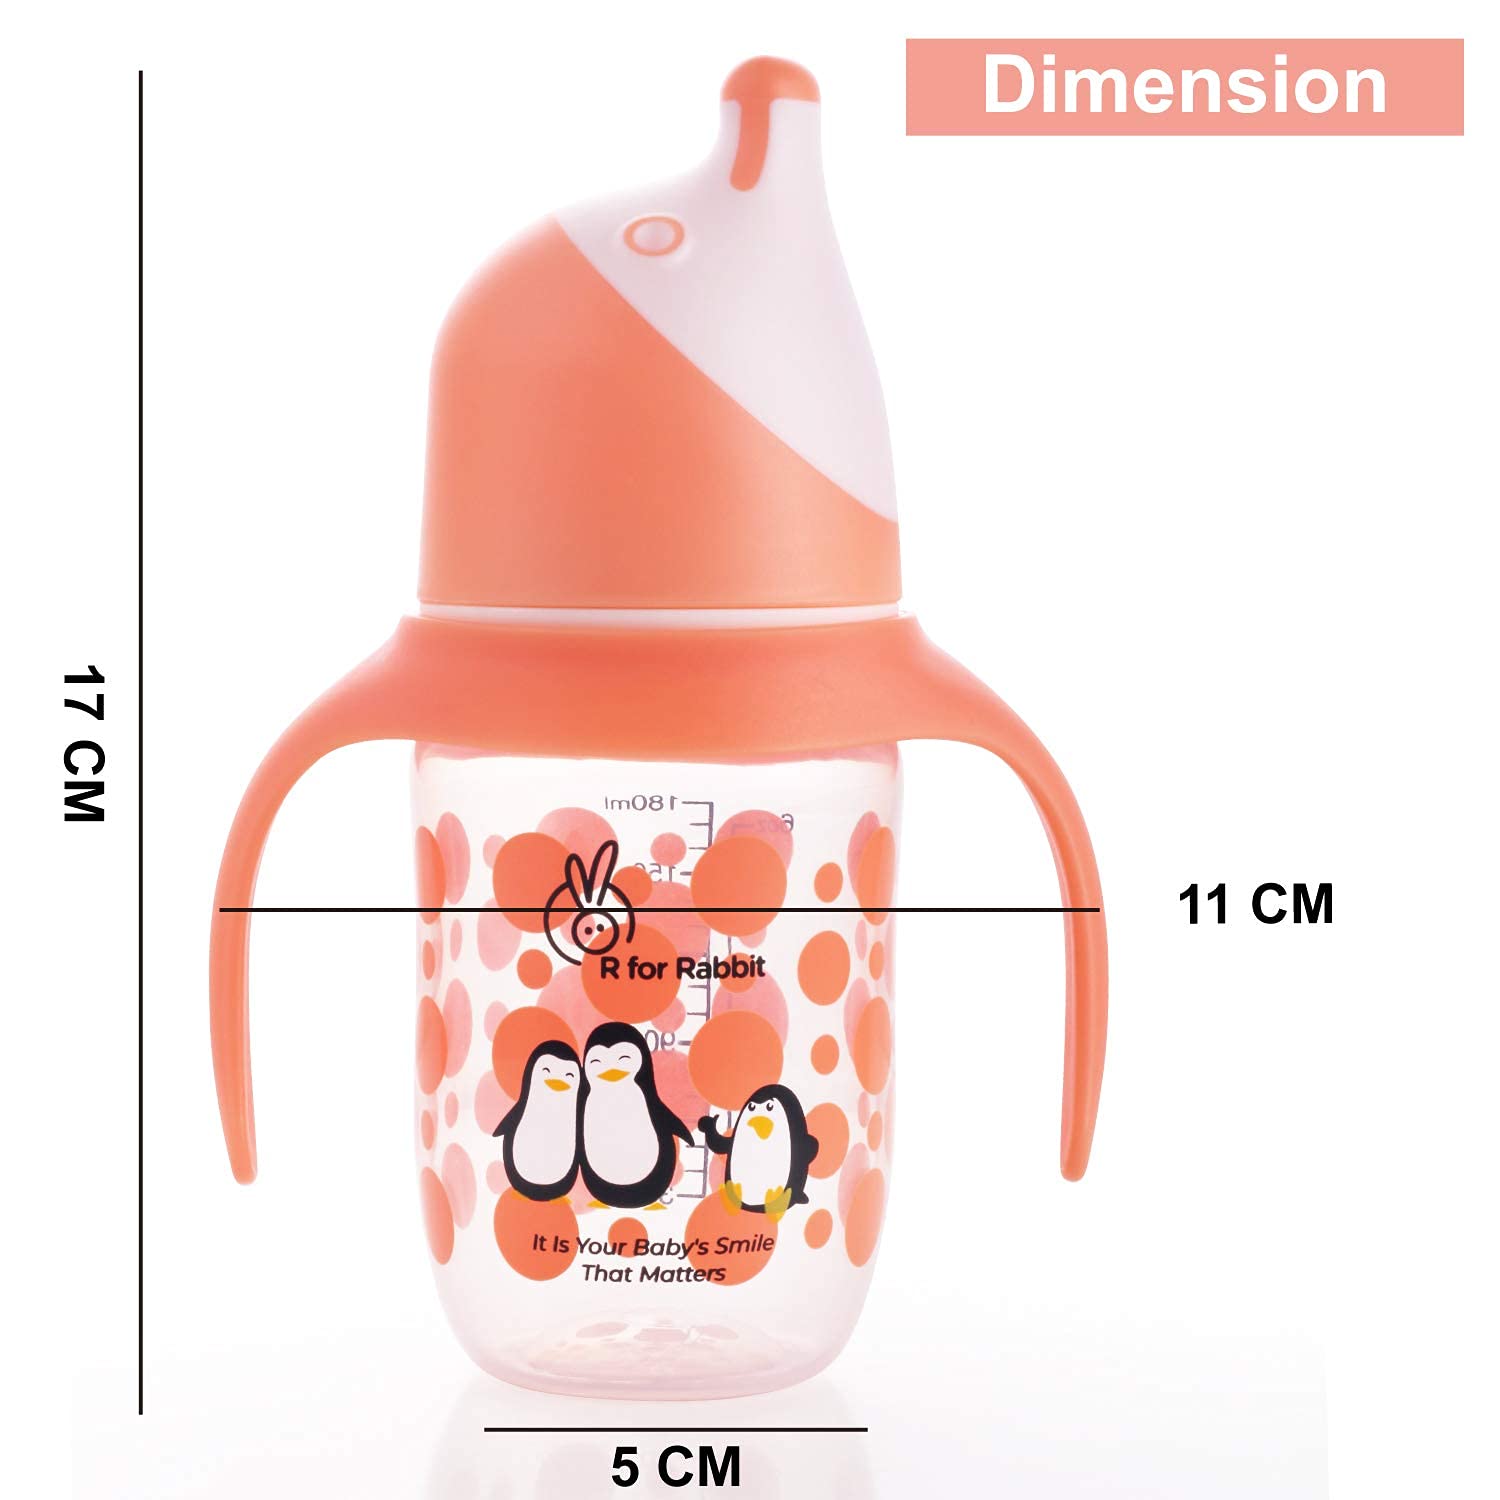 R FOR RABBIT Penguin Spout Cup With Twin Handle For Babies - Orange 180ml 6m+